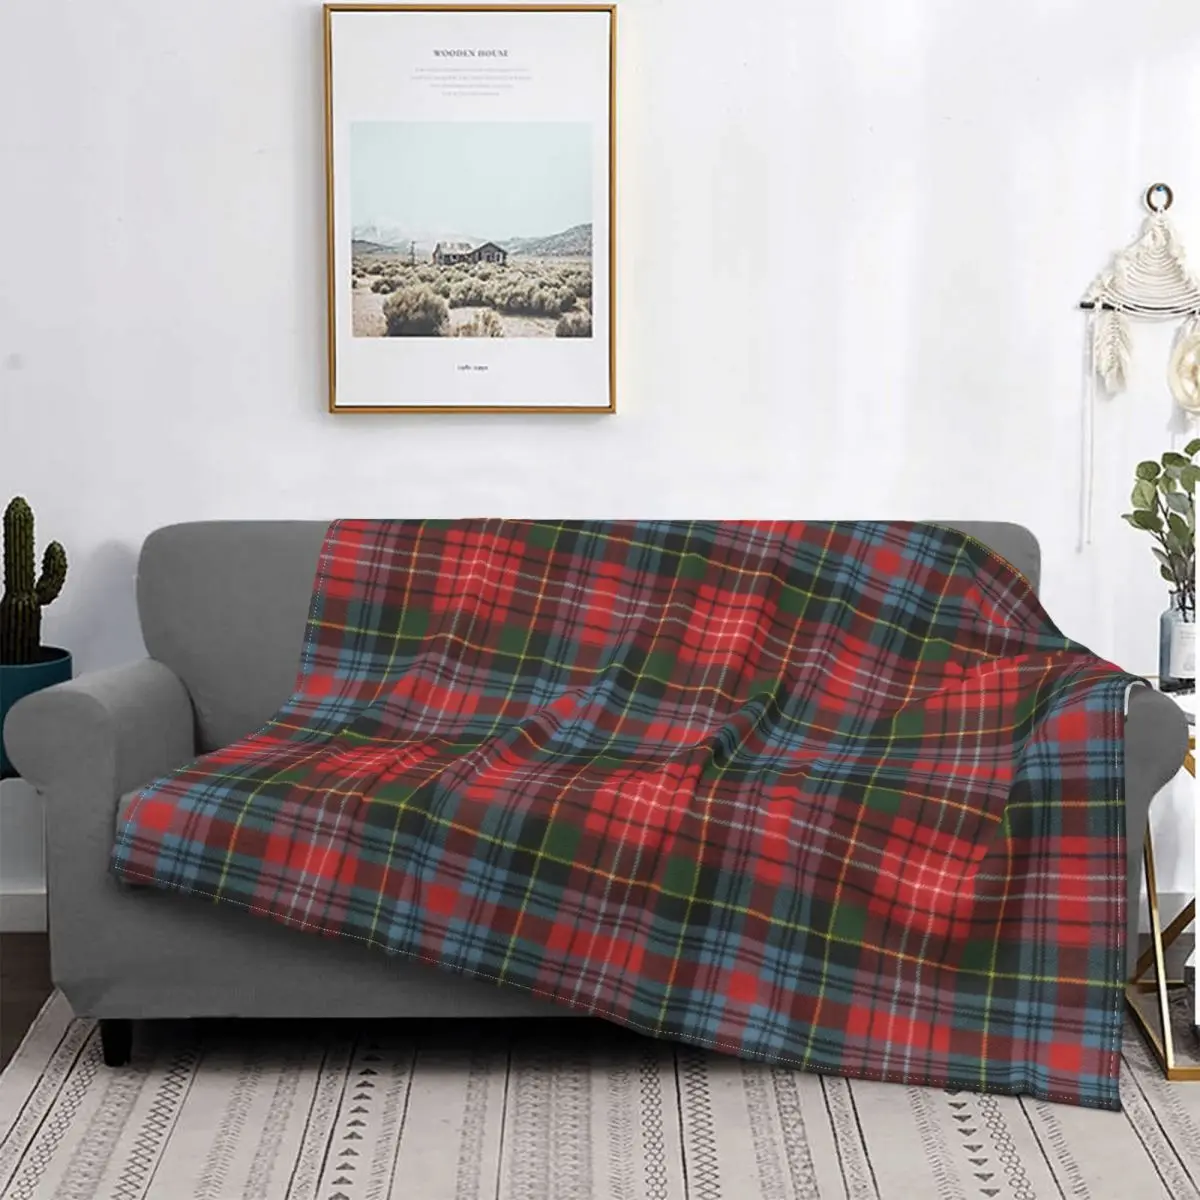 

Sofa Fleece Popular Tartan Plaid Throw Blanket Warm Flannel Gingham Check Texture Blankets for Bedroom Travel Couch Bedspreads